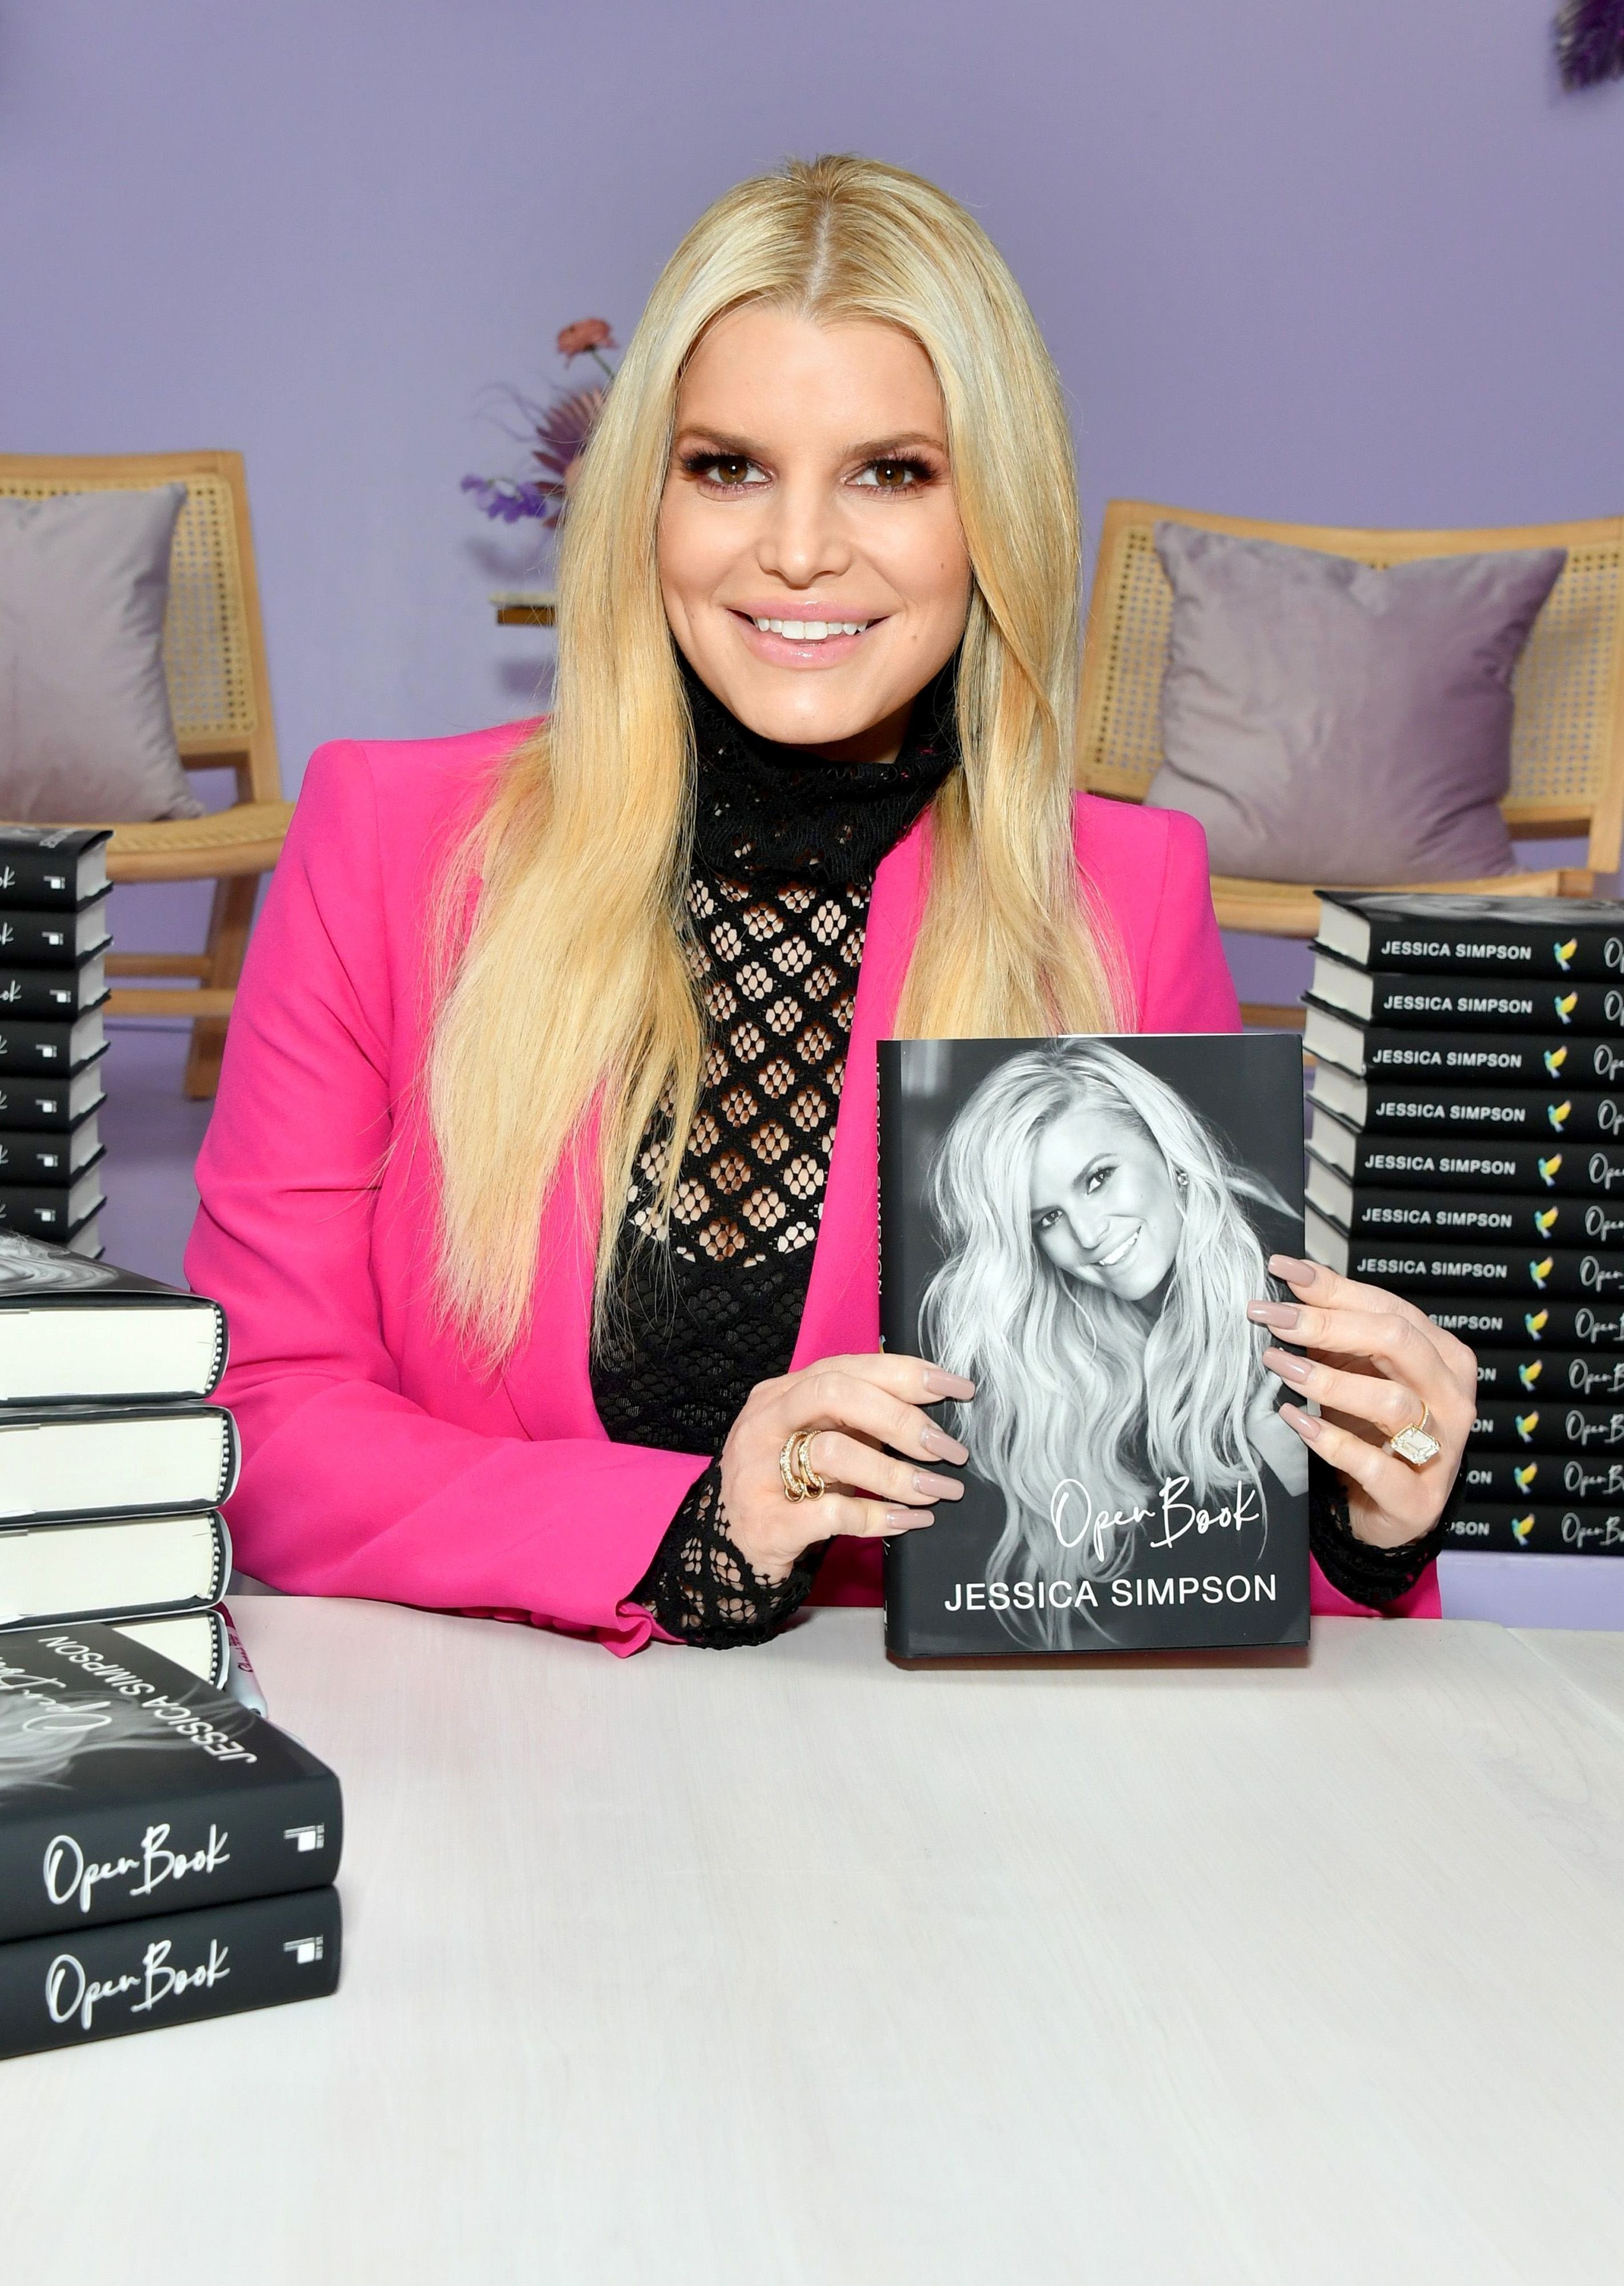 Jessica holds up her book at a book signing